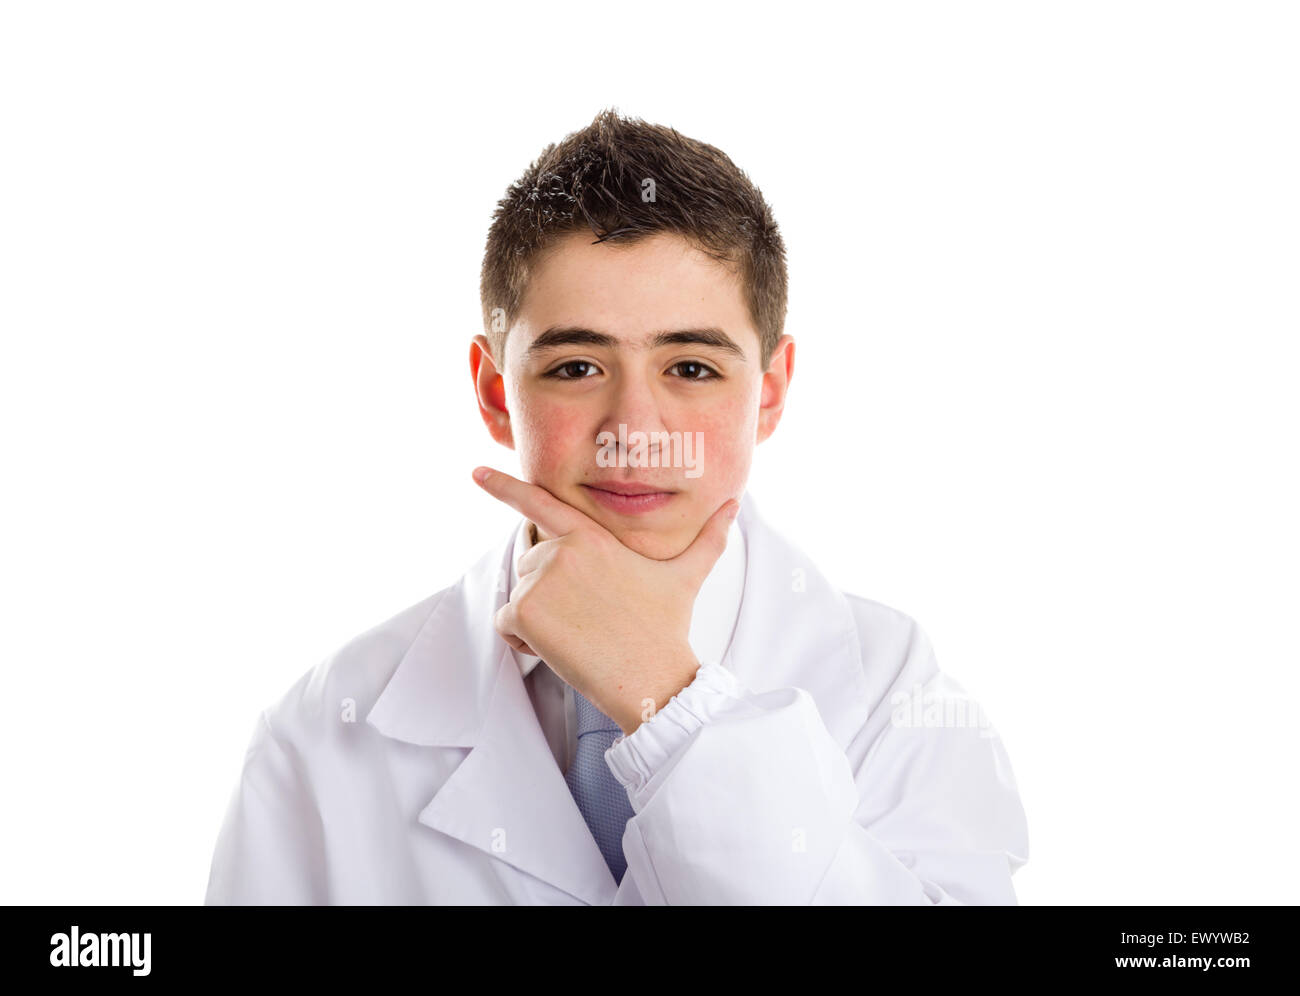 A boy doctor in white coat and blue tie helps to feel medicine more friendly: he is touching his chin while thinking. His acne skin has not ben retouched Stock Photo